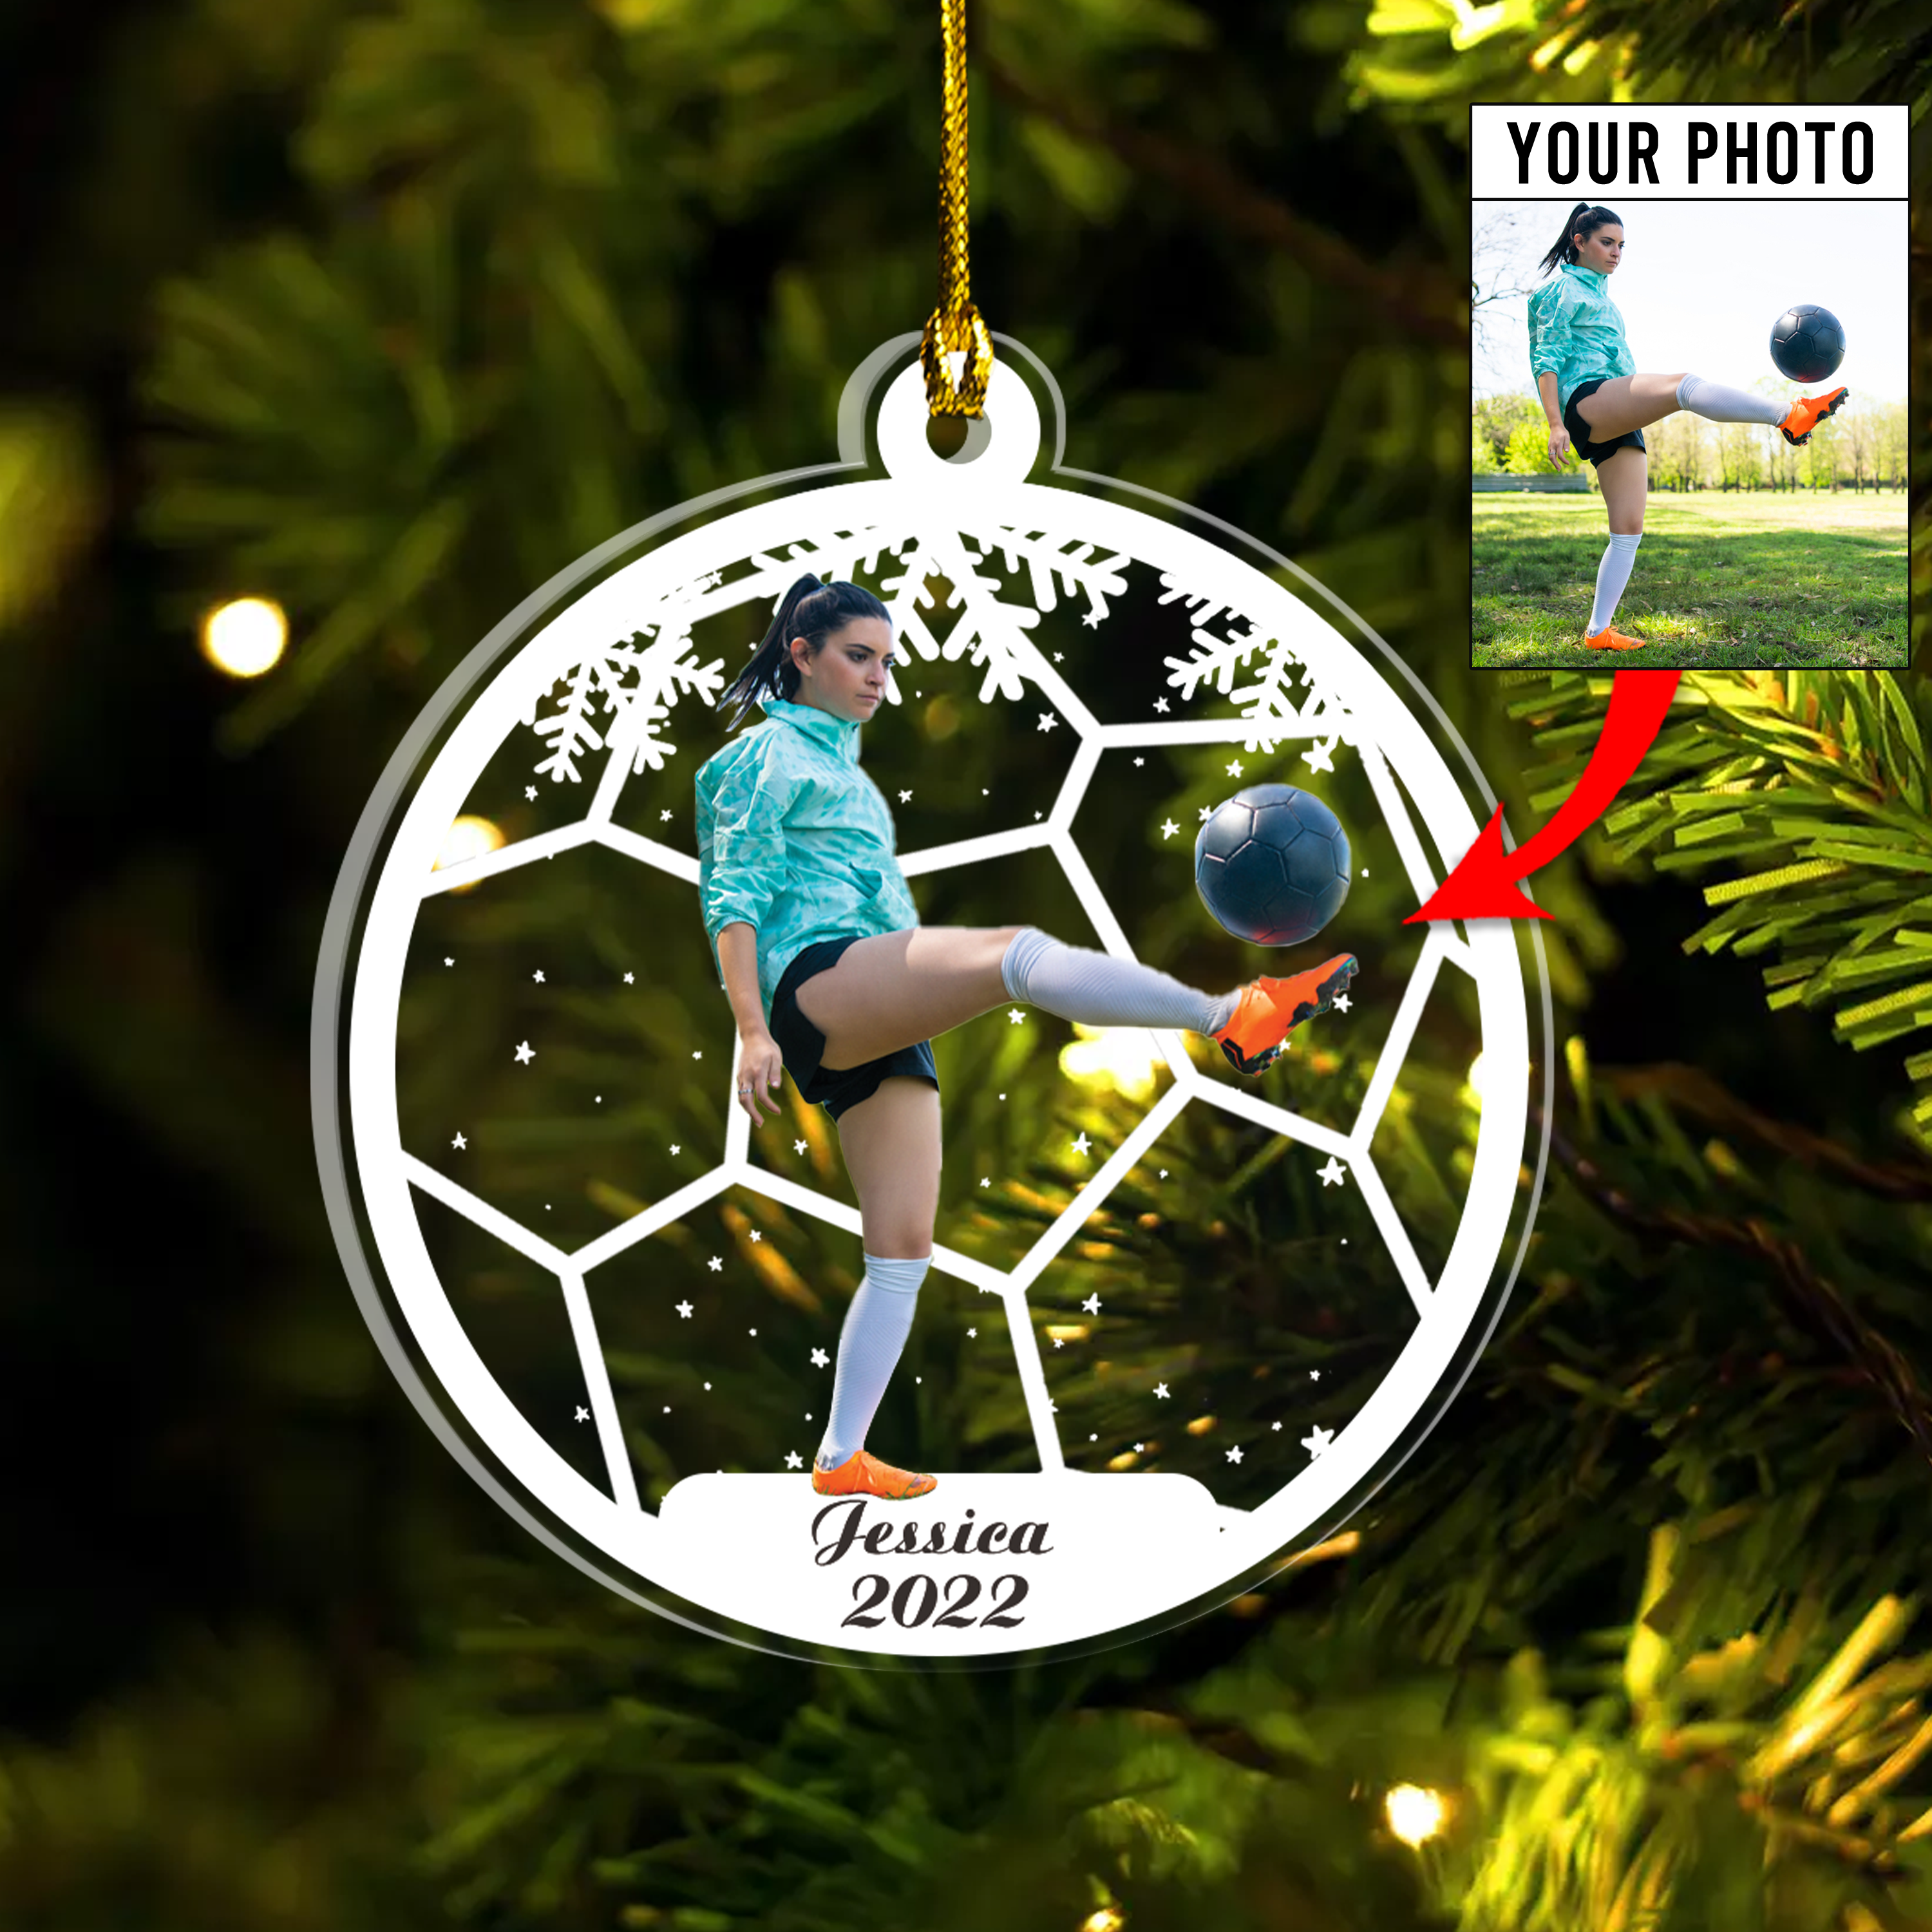 Personalized Soccer Photo Acrylic Ornament, Gift For Soccer Lovers